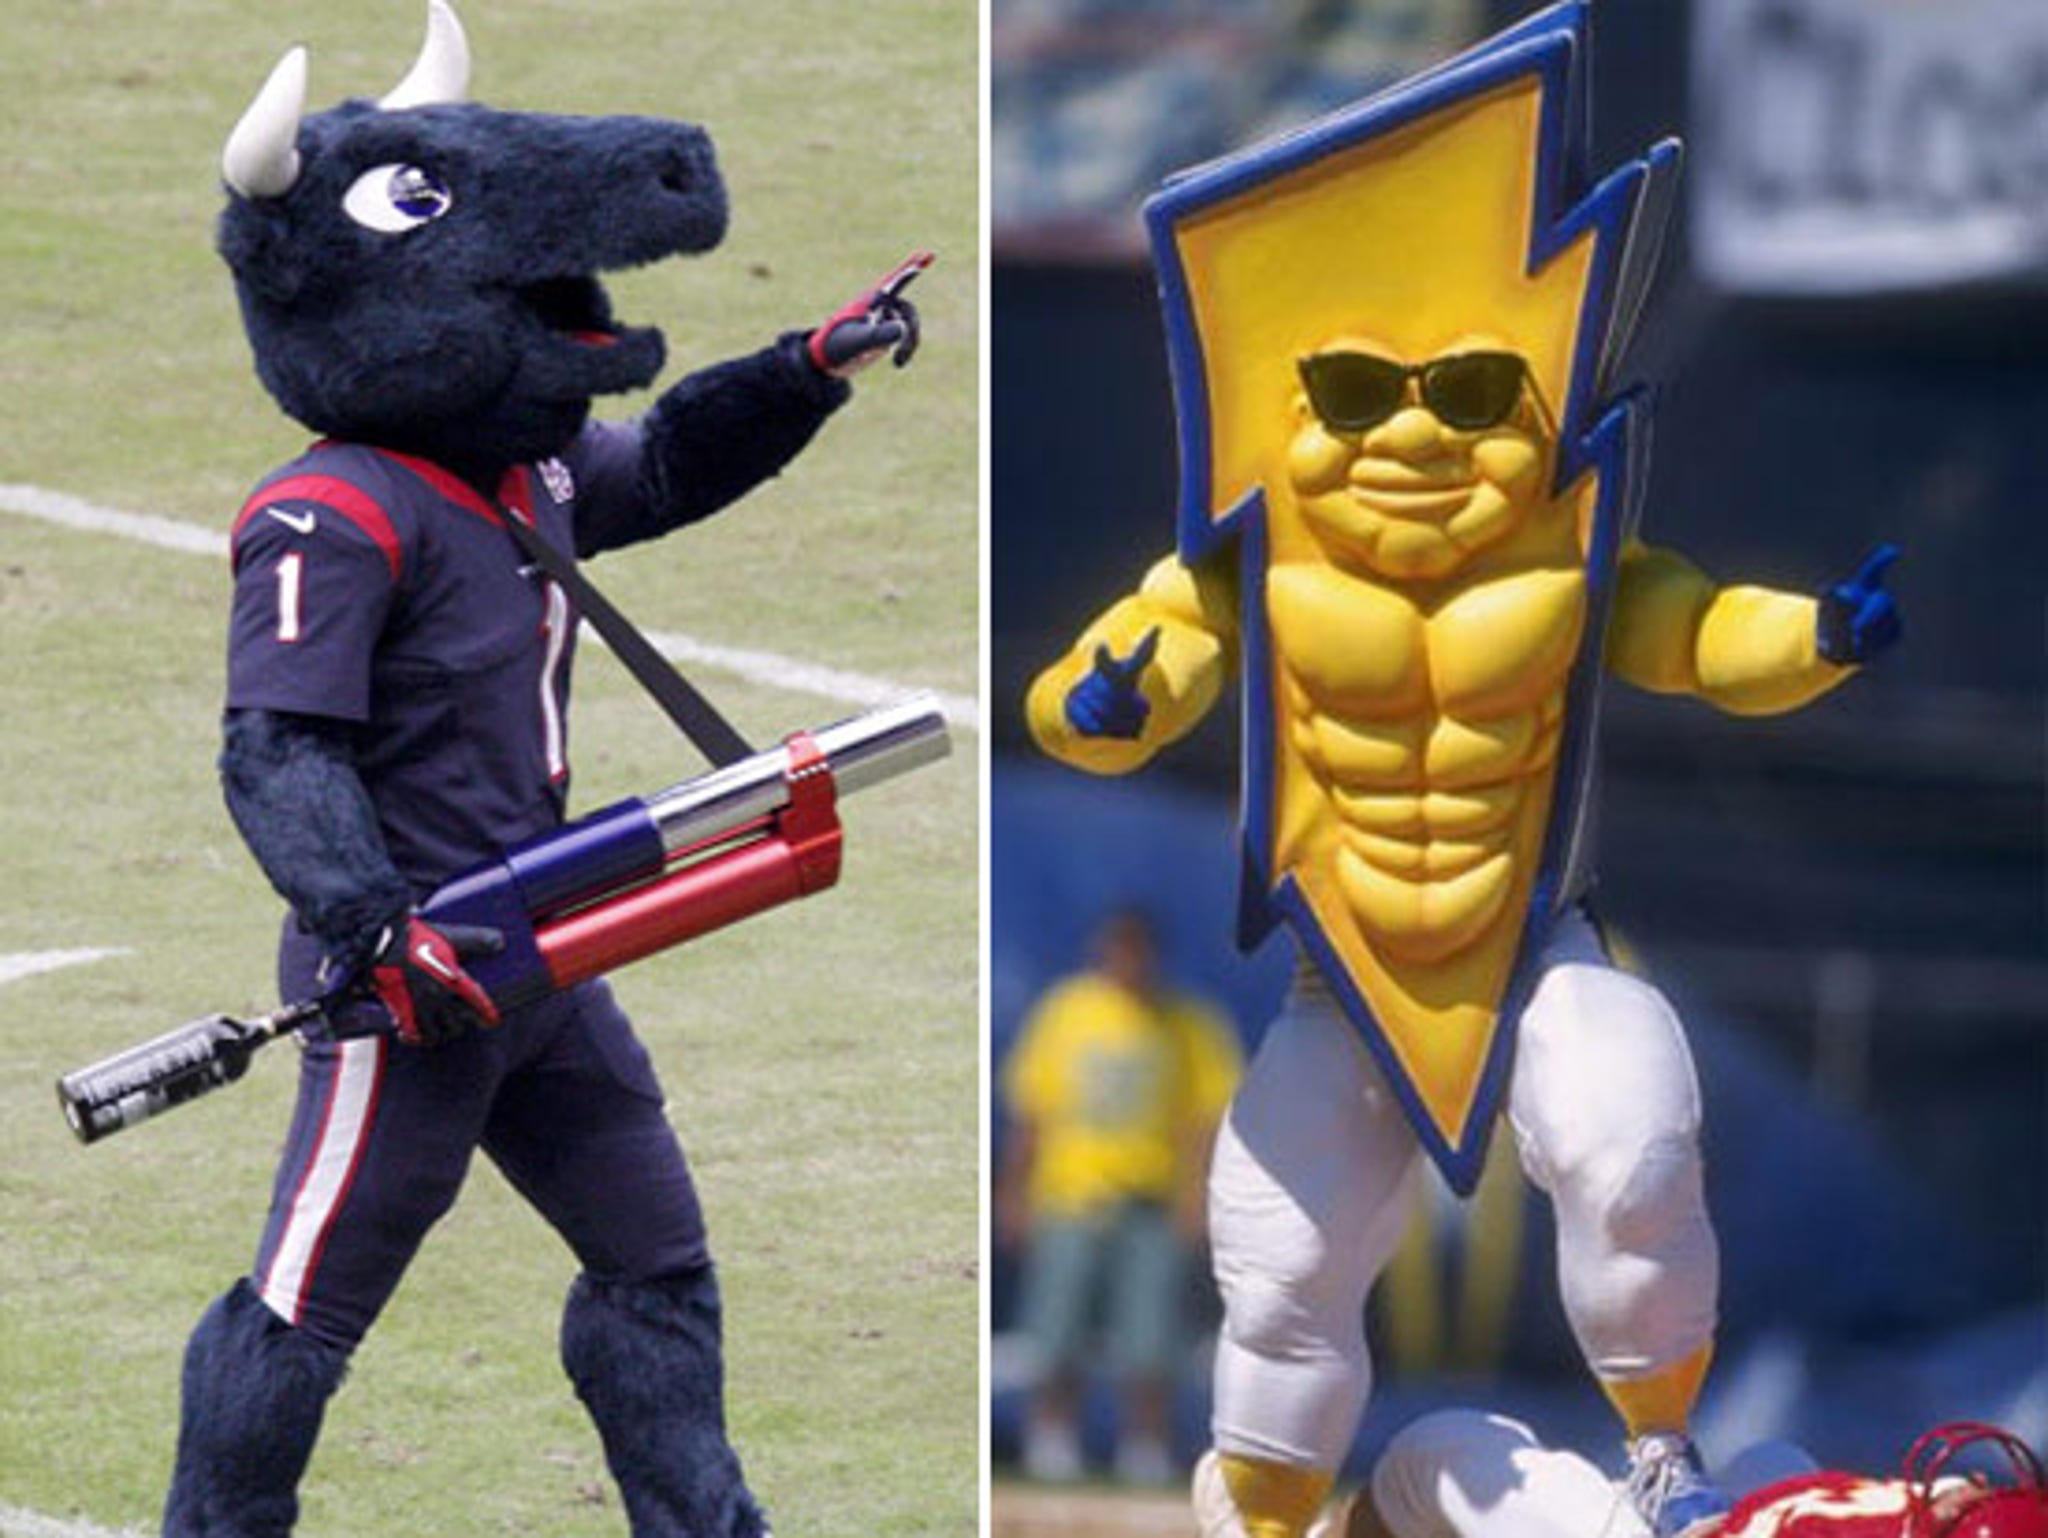 Chargers Mascot goes viral as meme after NFL HOF tribute to Junior